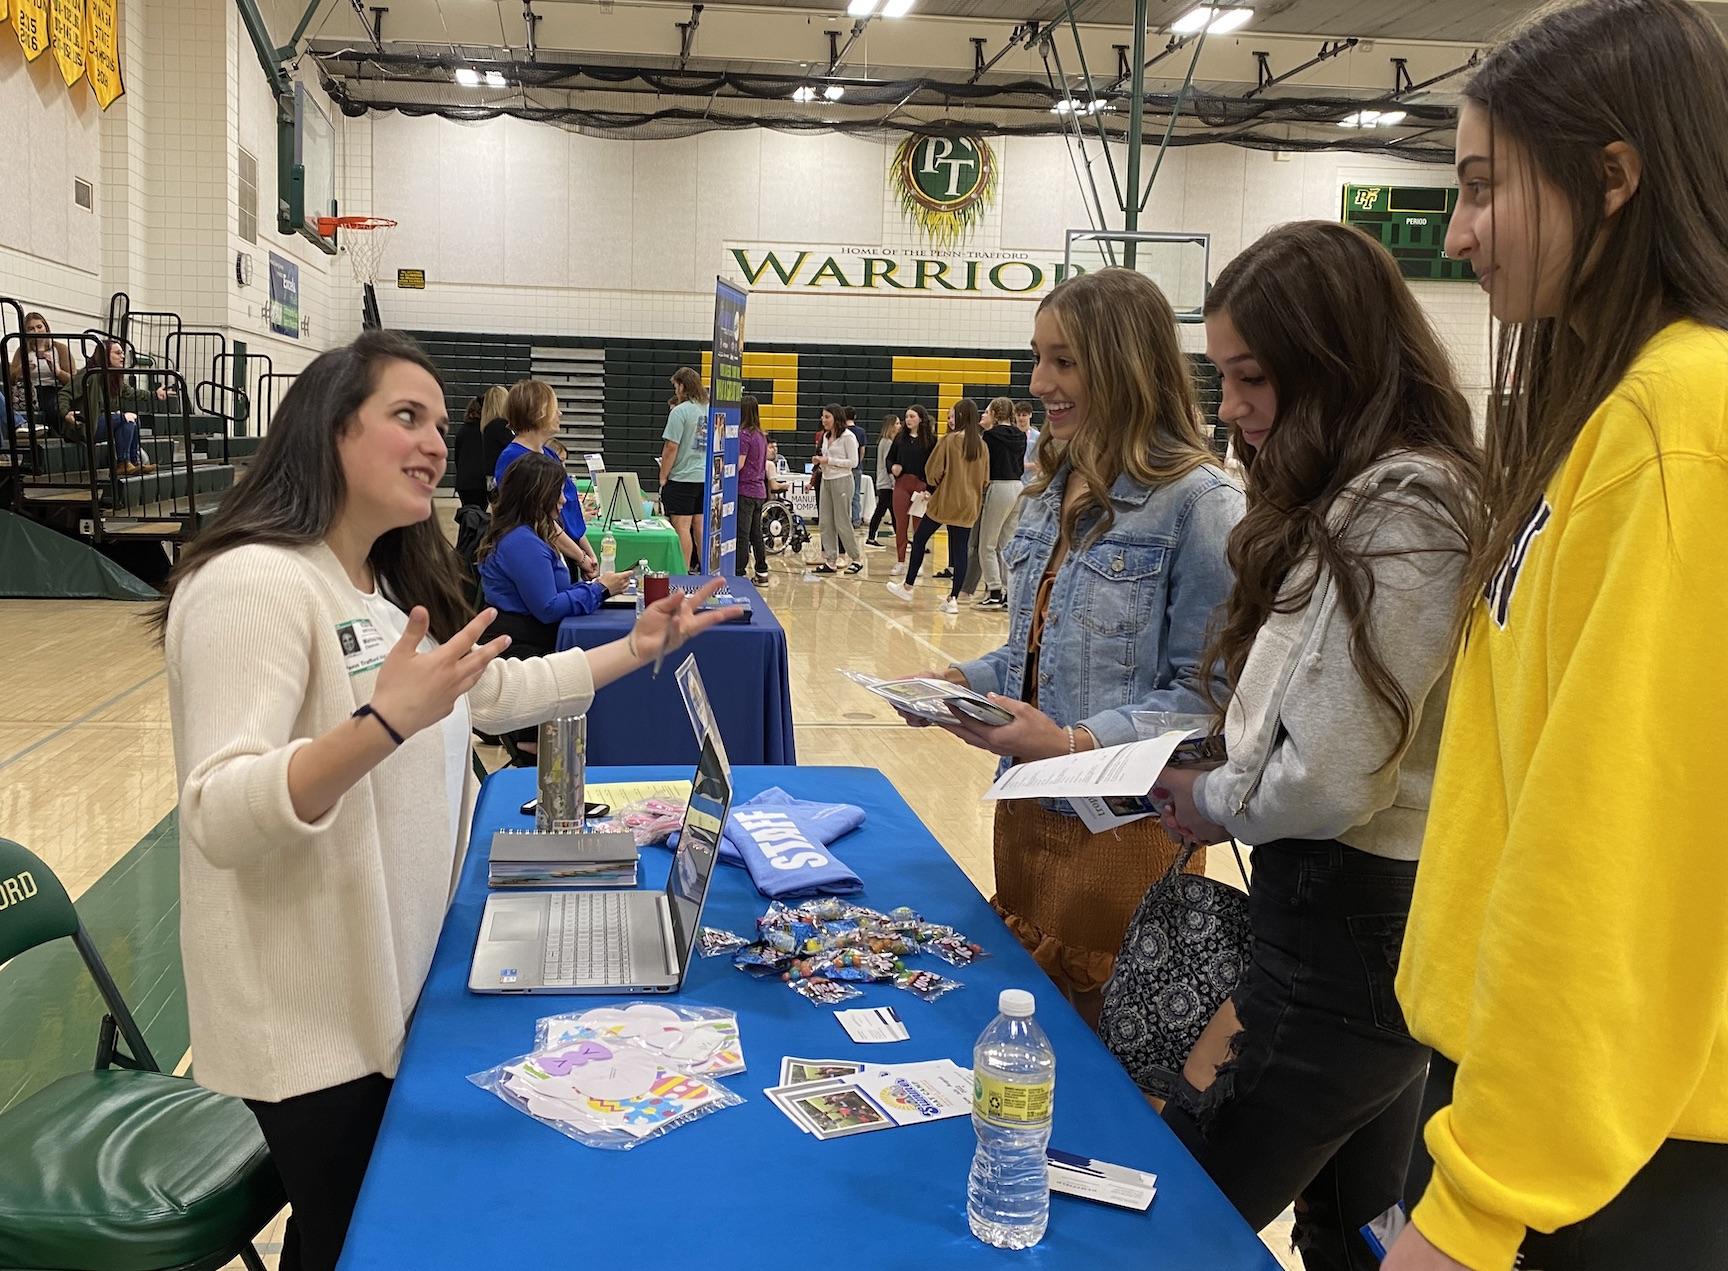 At the Hempfield Rec table, Alexa Rullo, Brianna Pusateri, and Lilly Palladino learn about becoming summer camp counselors